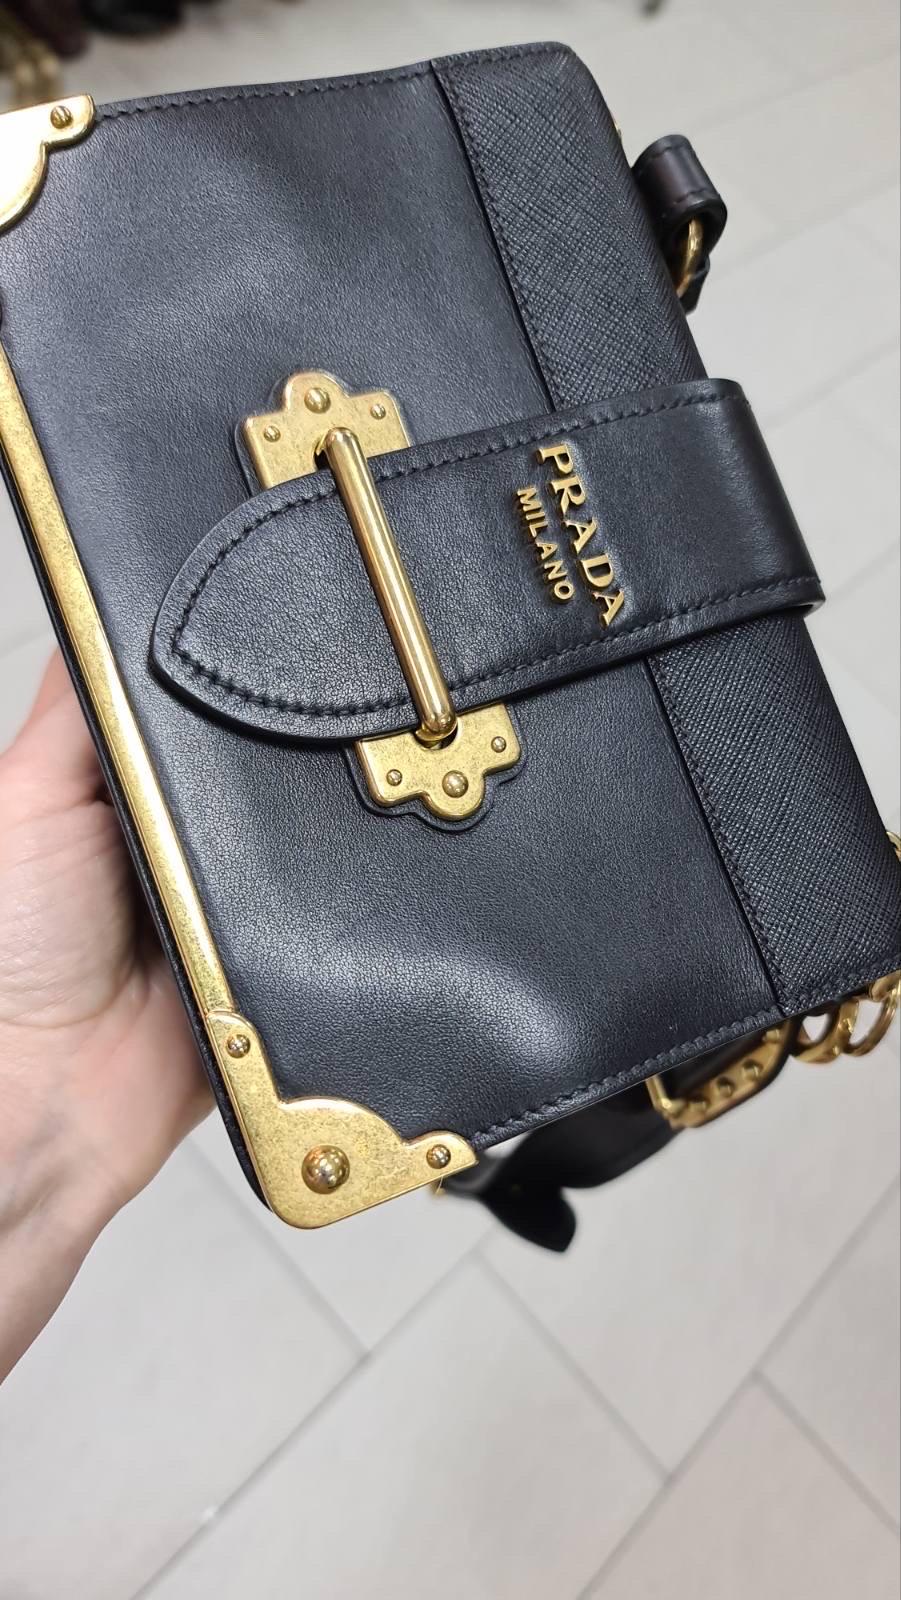 Prada Cahier Leather Bag In Good Condition For Sale In Krakow, PL